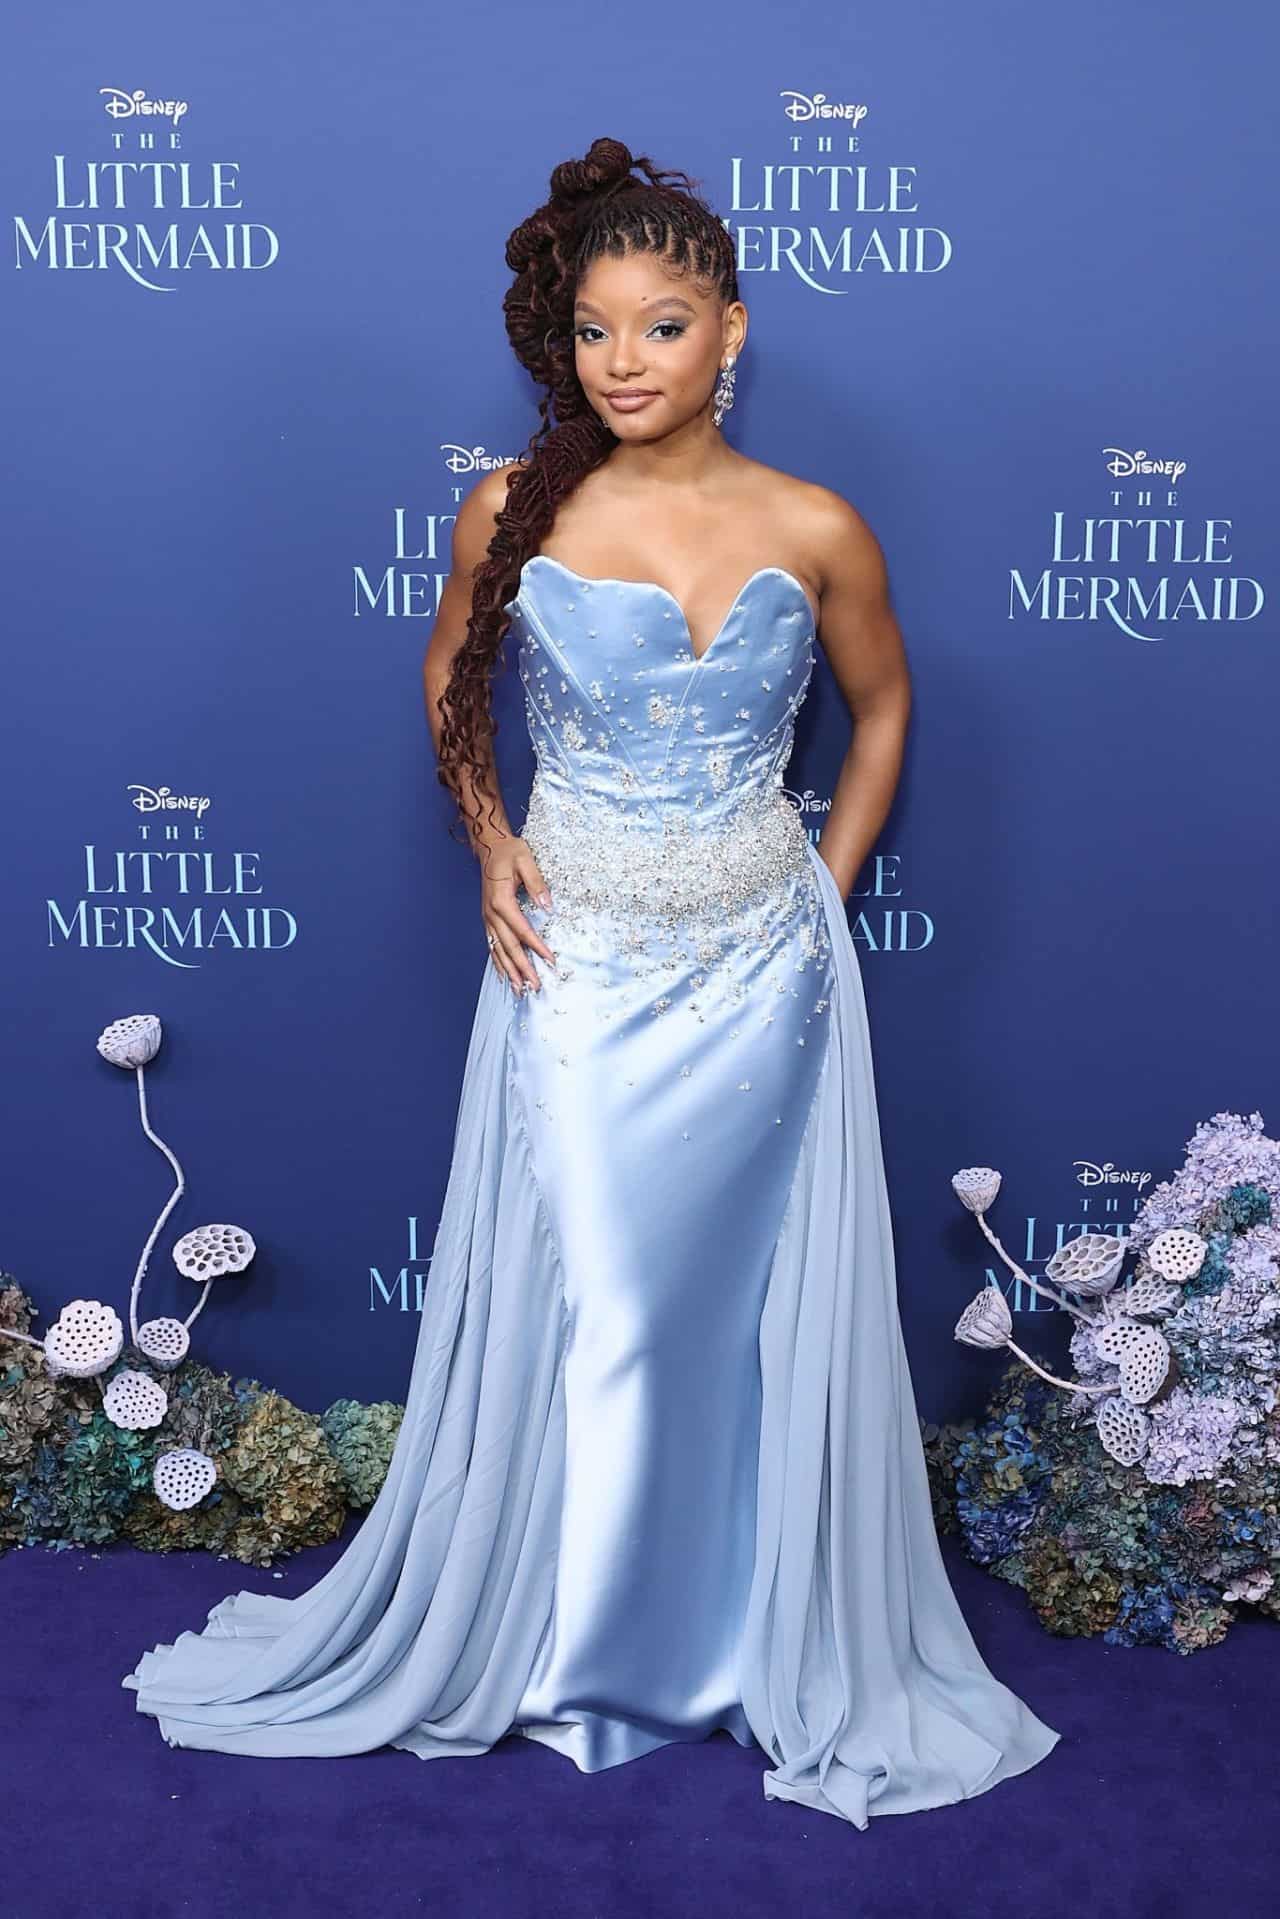 Halle Bailey Makes a Splash at the Australian Premiere of "The Little Mermaid"